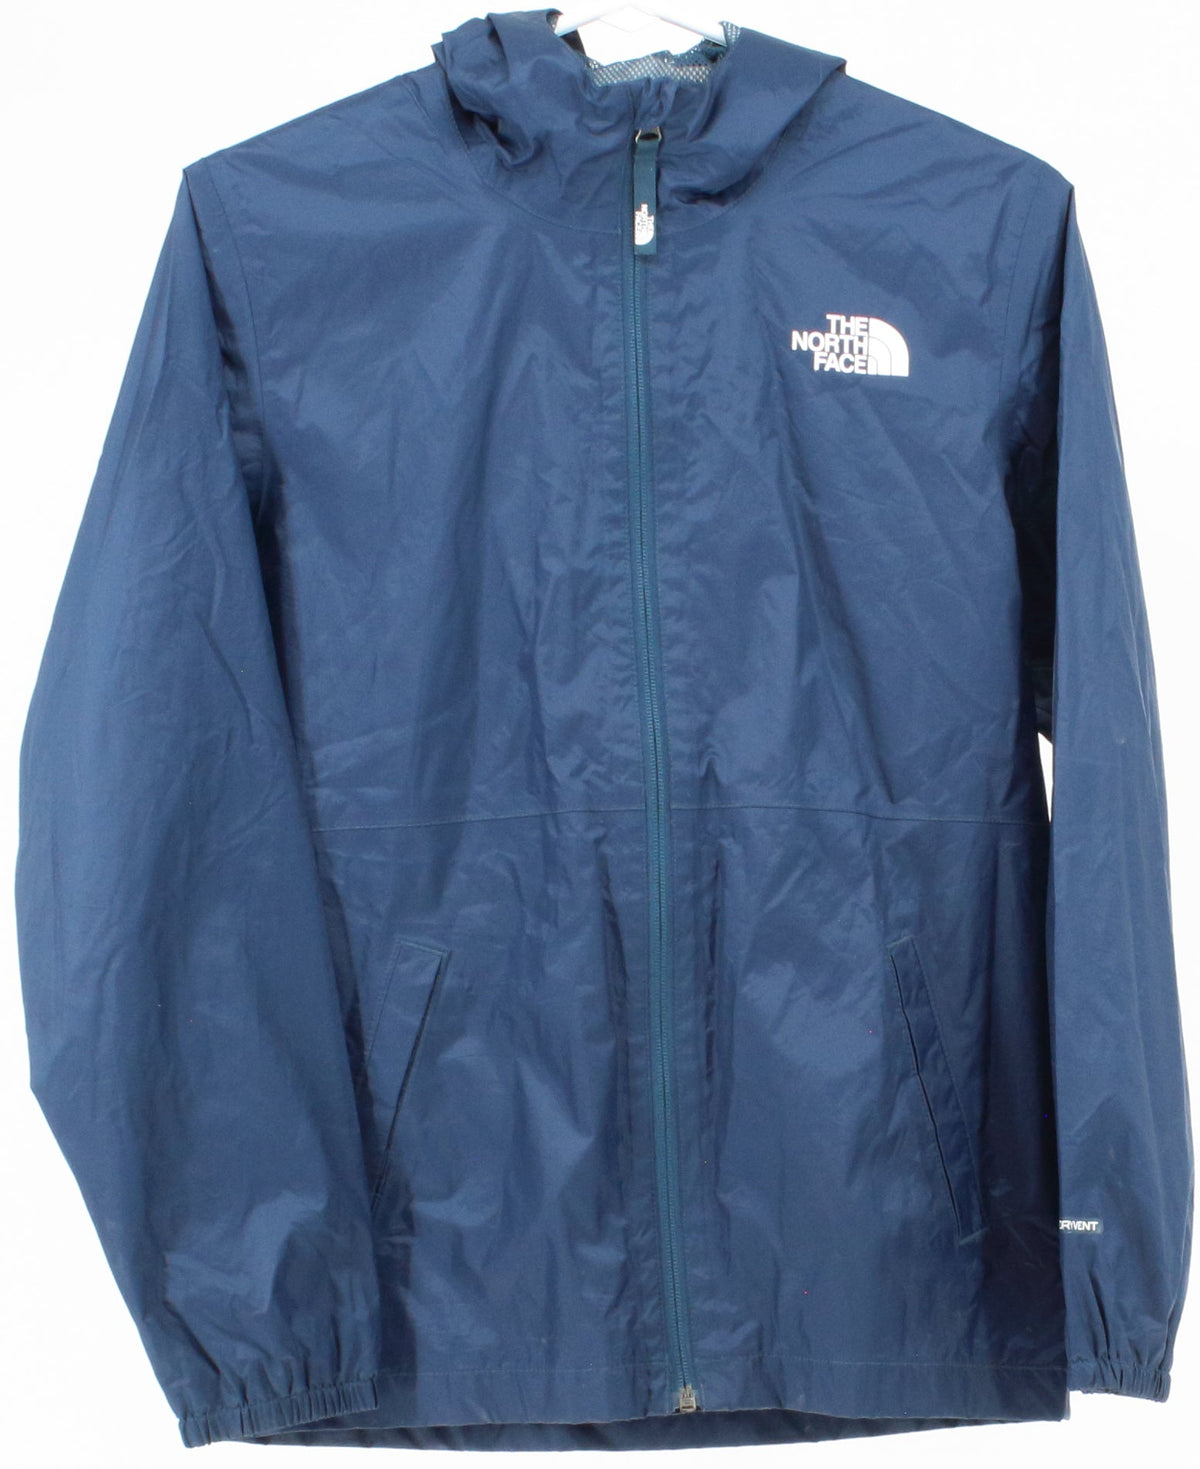 The North Face DryVent Navy Blue Hooded Youth Nylon Jacket